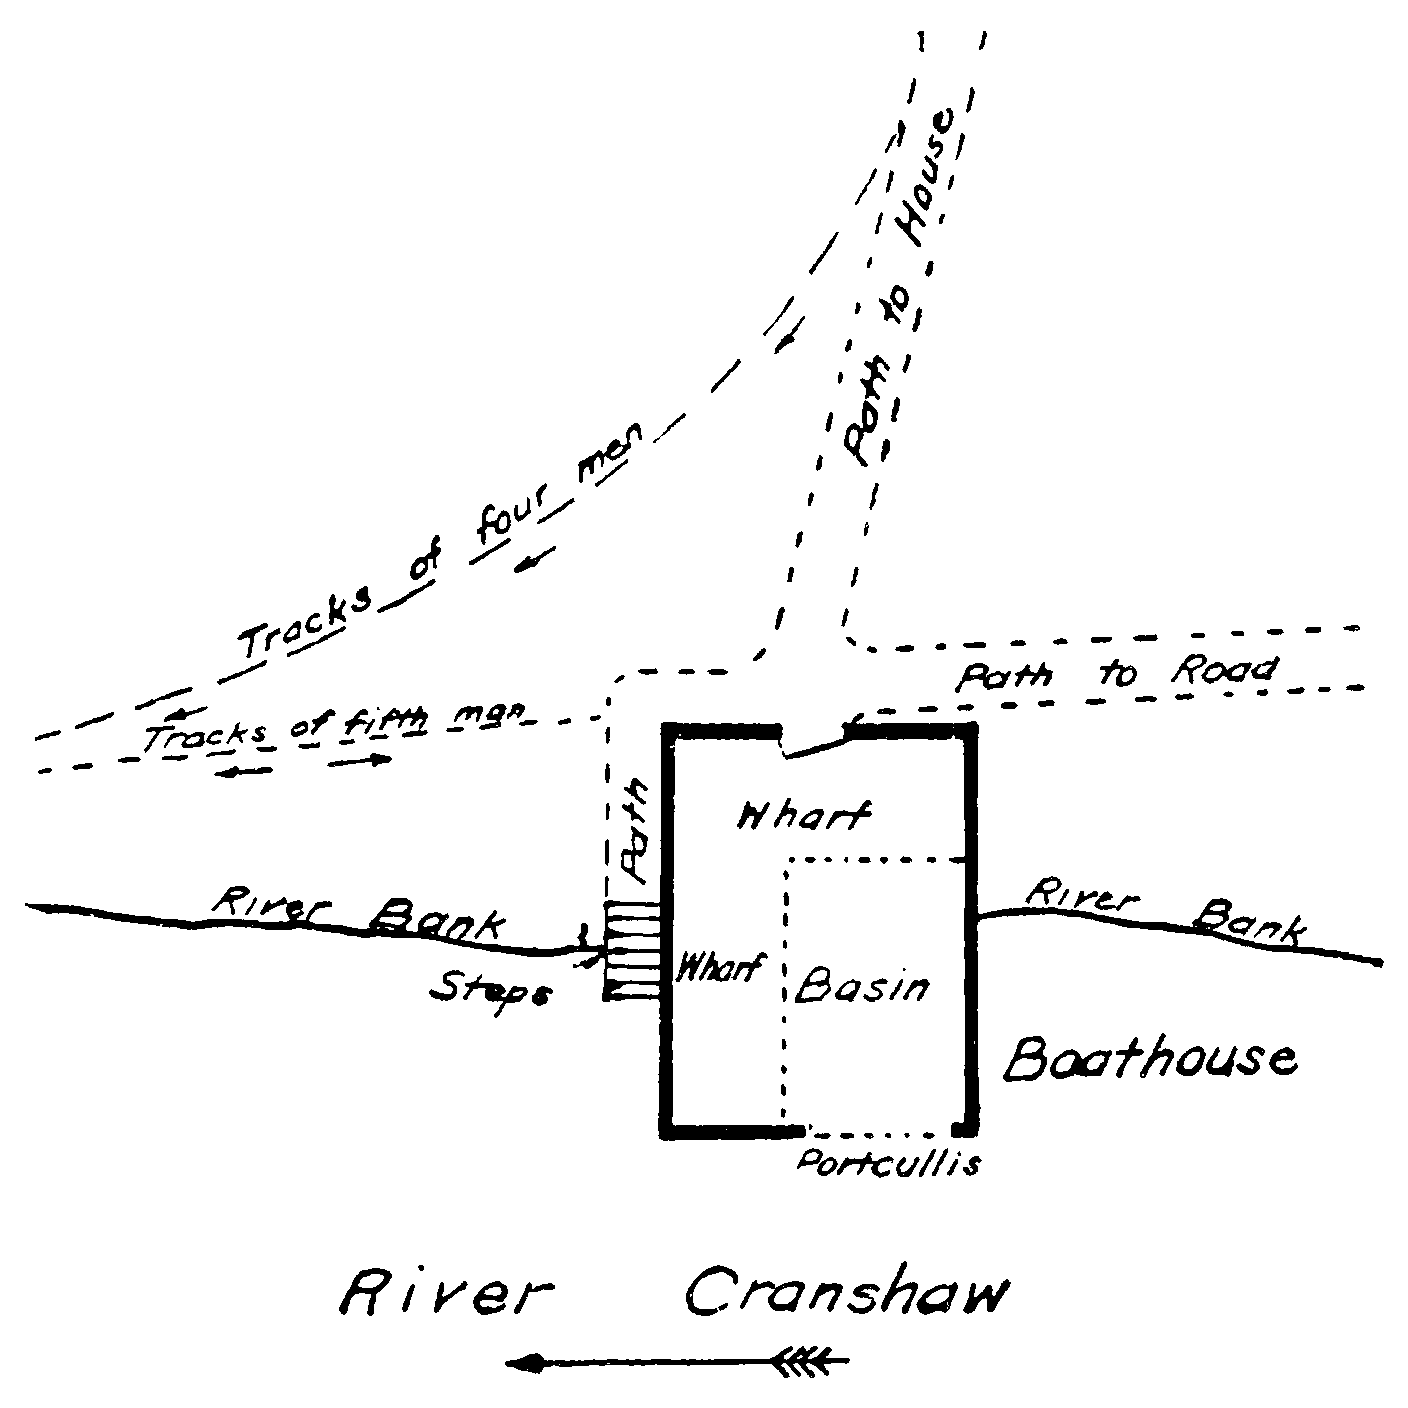 A ground plan of a boathouse     situated on the bank of River Cranshaw, with two different sets of     footprint tracks passing nearby.